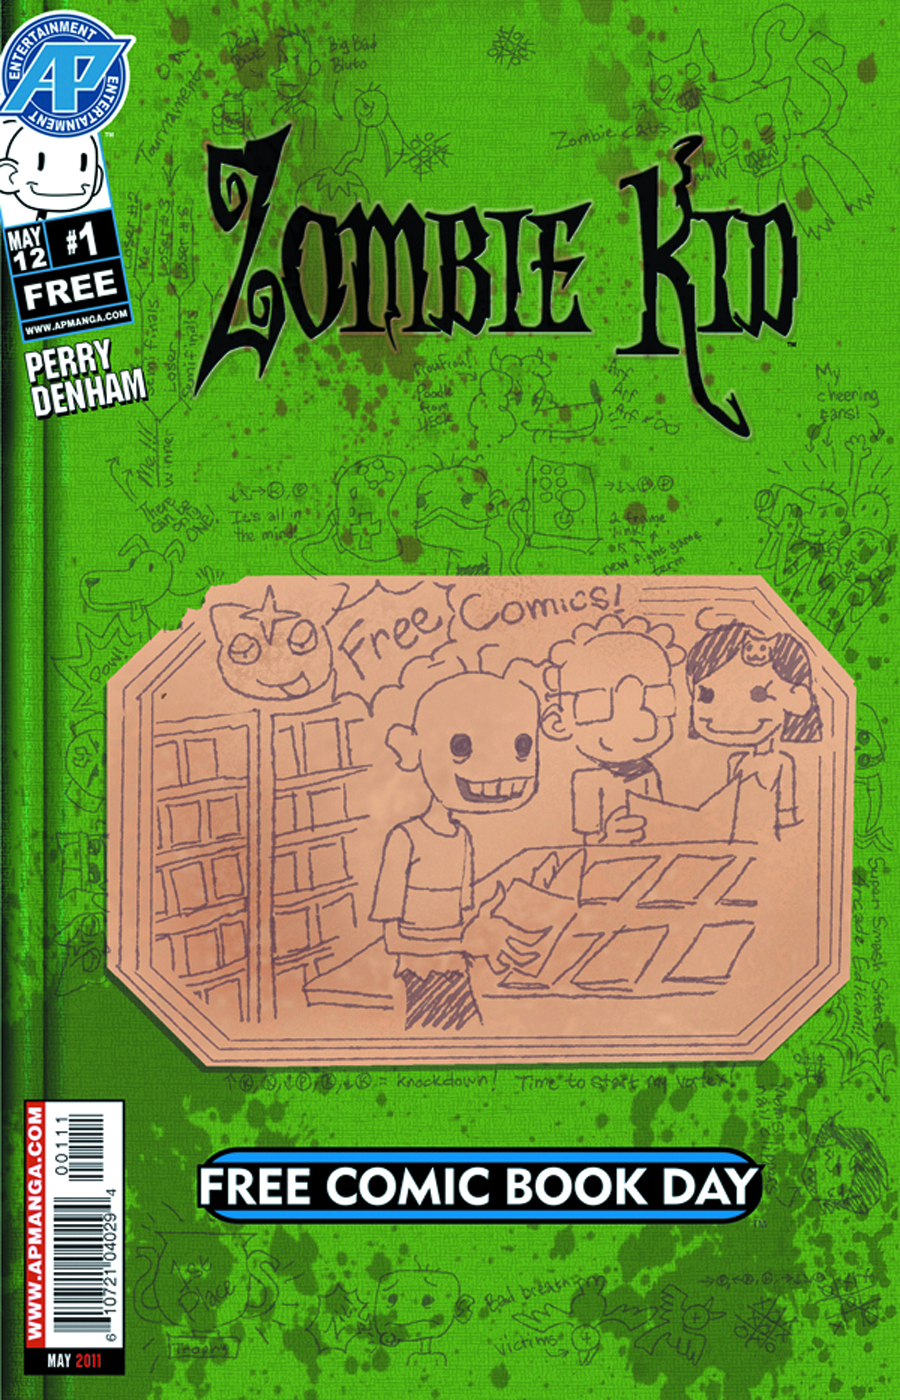 Diary of a Zombie Kid